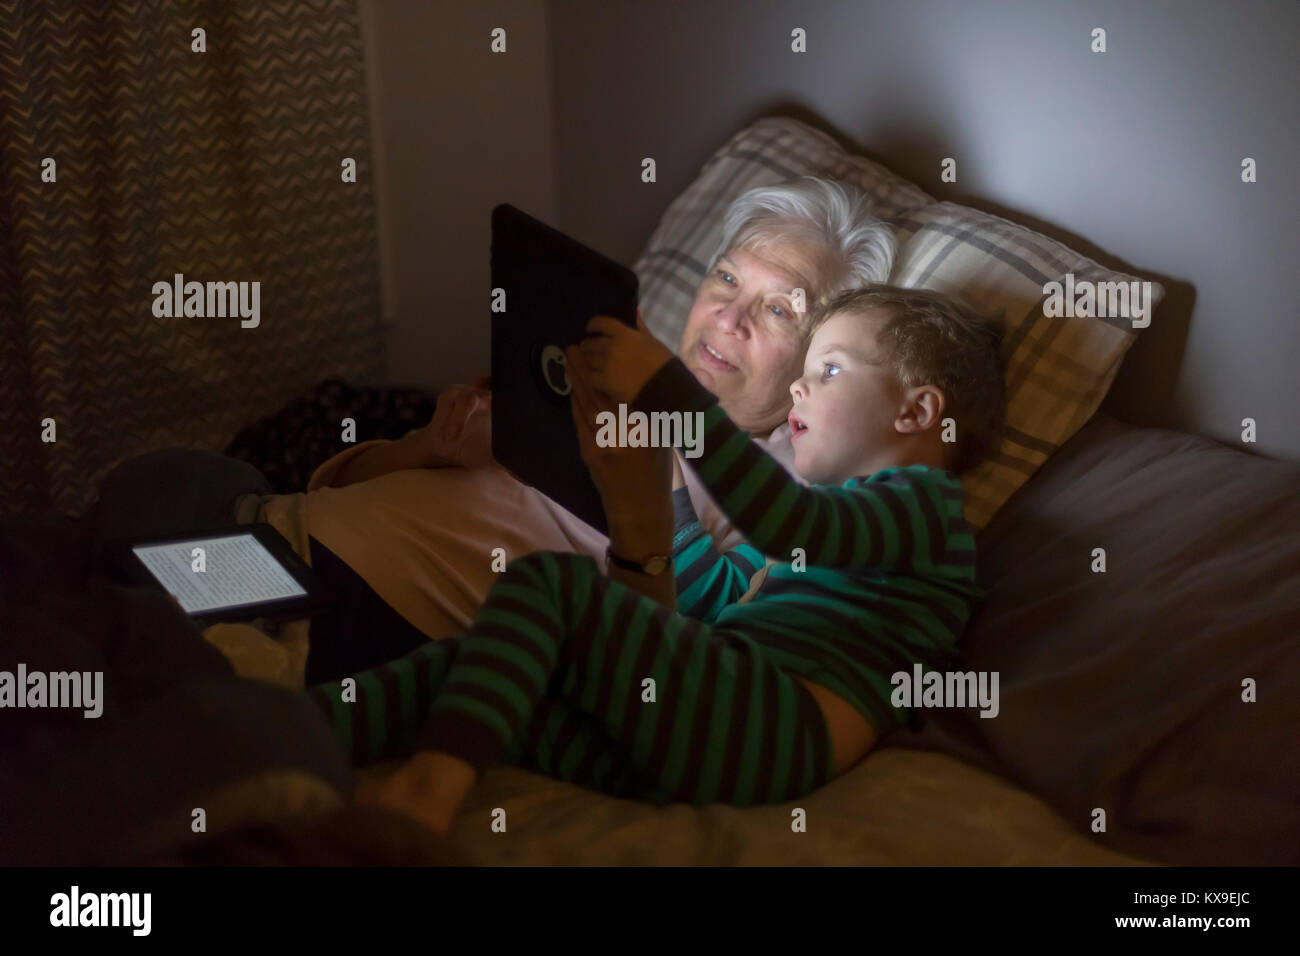 Wheat Ridge, Colorado - Susan Newell, 69, and her grandson, Adam Hjermstad Jr., 3, play an educational game on an iPad before bedtime. Stock Photo